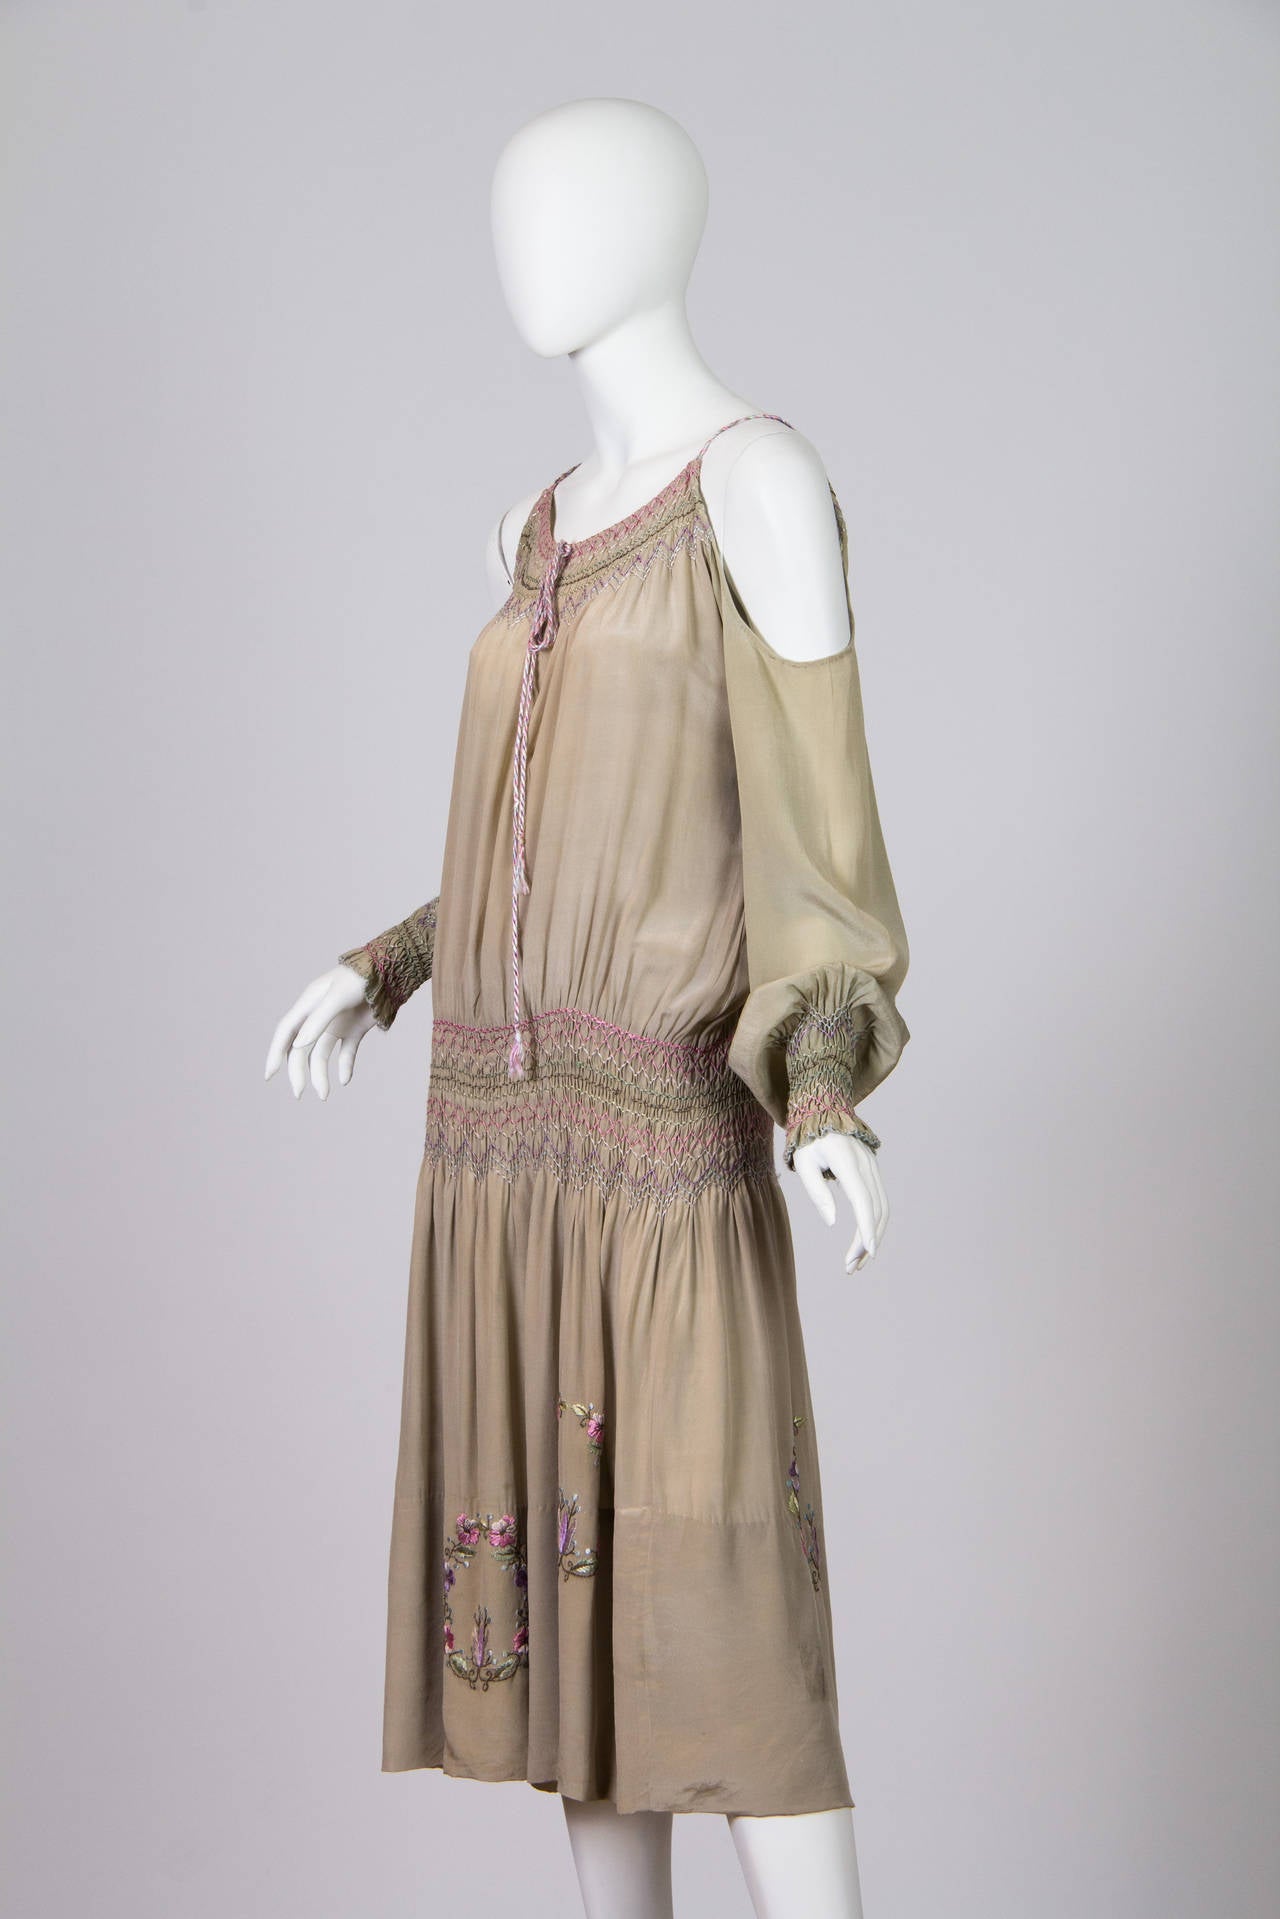 Beauty never knew such a lover. This dress dates to the early to mid 1920s. Russian peasant dresses and embroidery became a huge western trend once Chanel gave them her approval. Here this dress has all the features one looks for in one of these